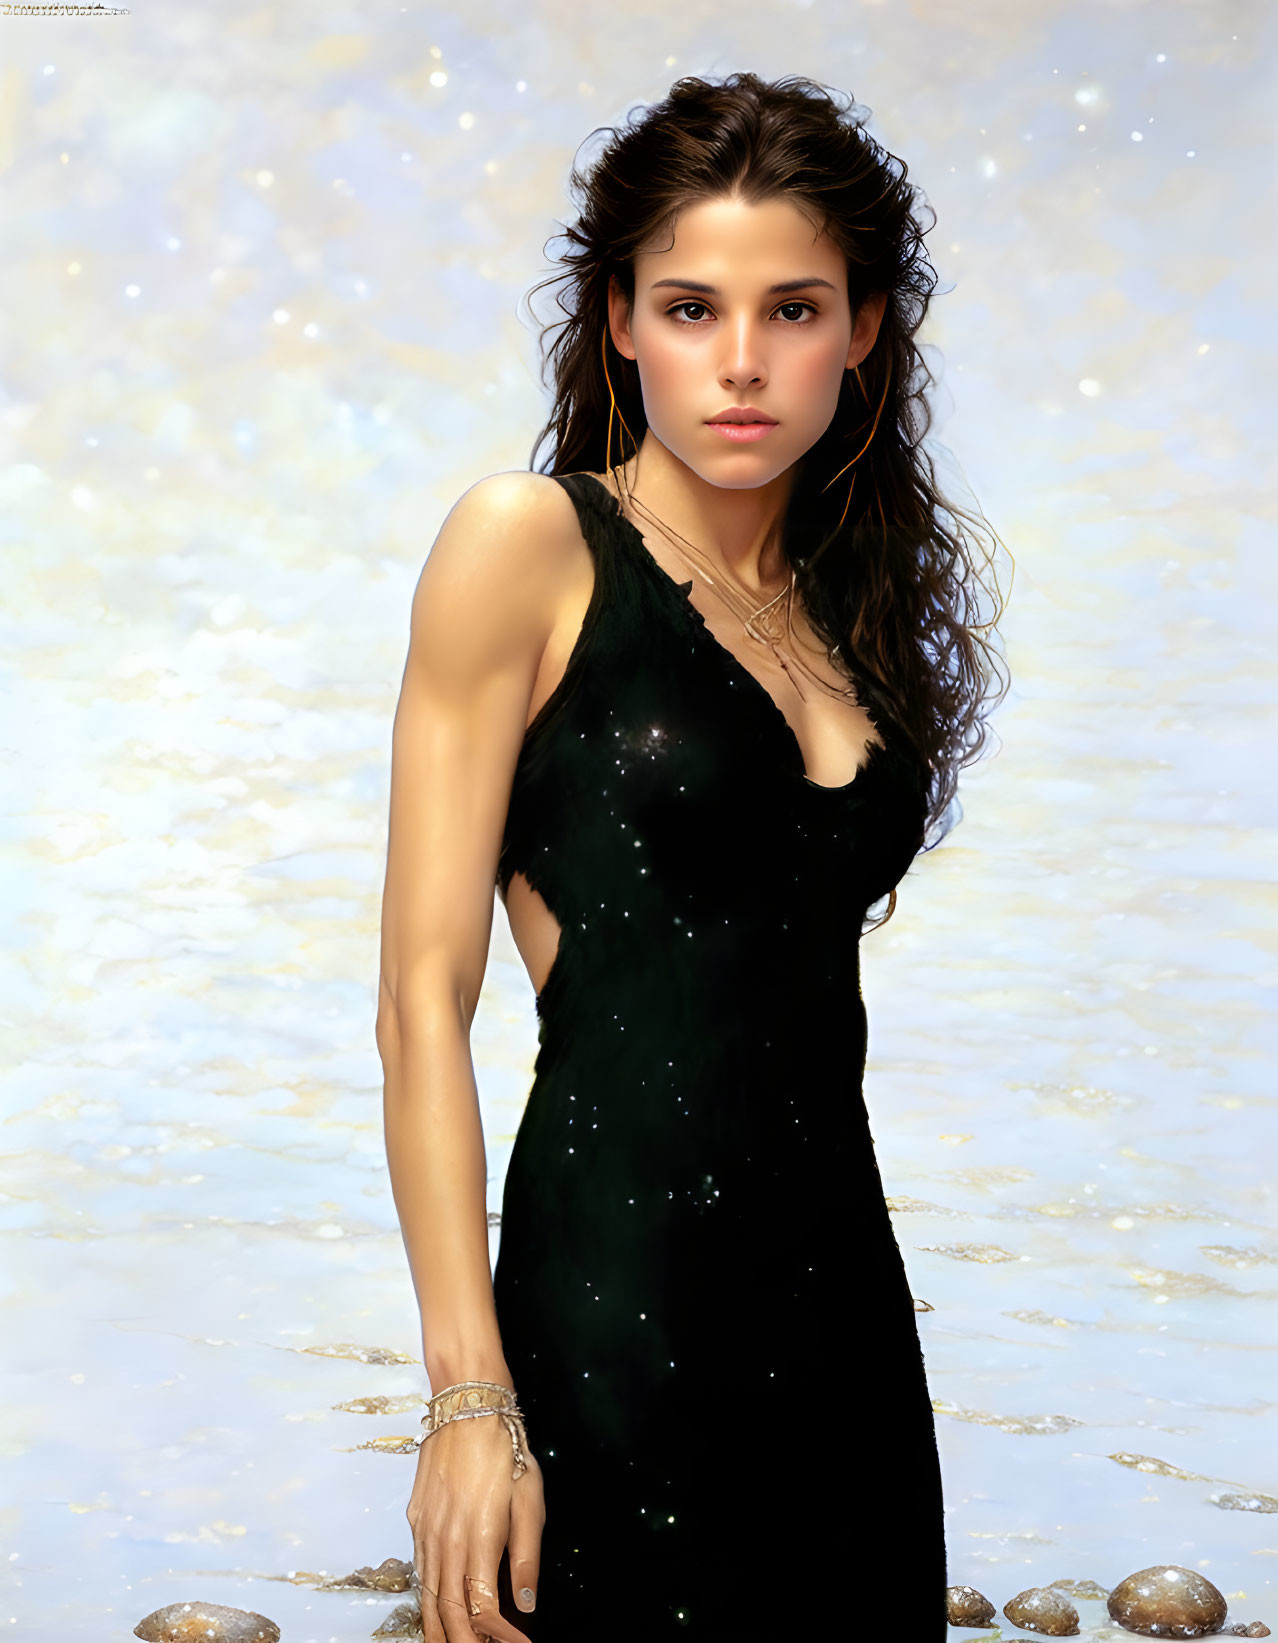 Brown-haired woman in starry dress against cosmic backdrop